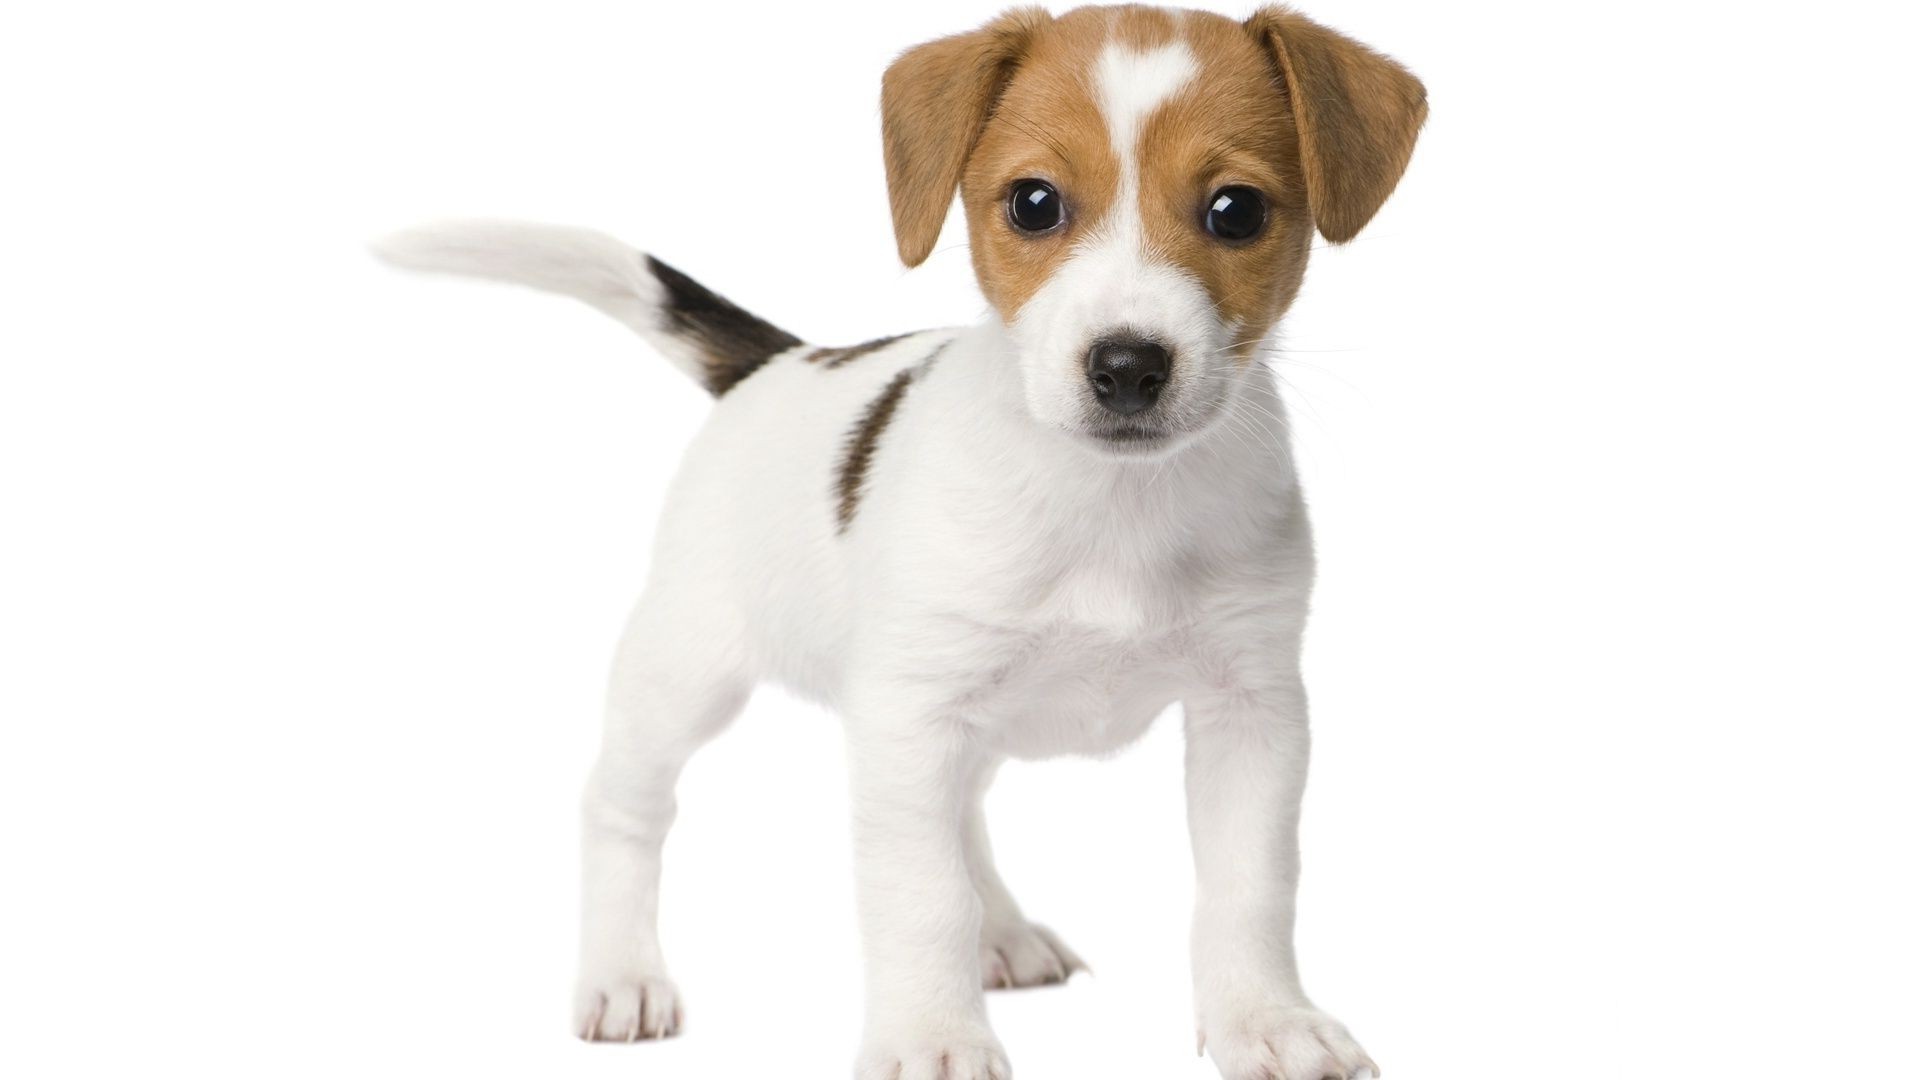 dogs dog cute pet canine mammal animal puppy little sit purebred pedigree isolated funny breed looking studio terrier